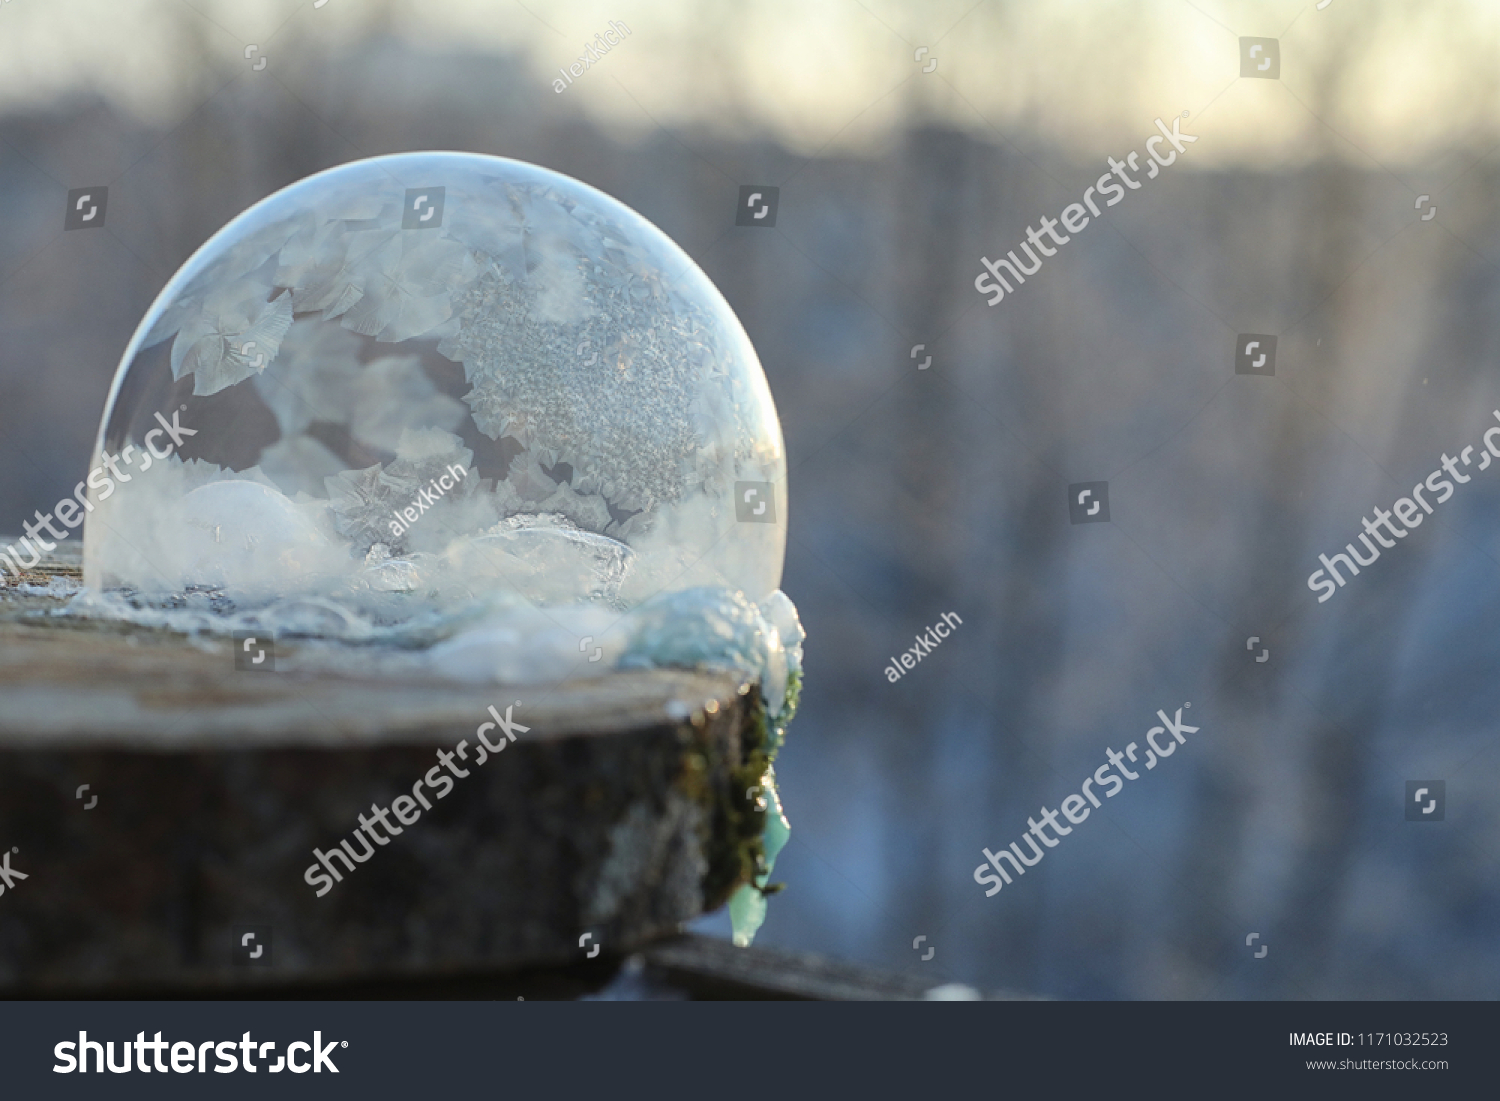 Soap bubbles freeze in the cold. Winter soapy water freezes in air.
 #1171032523